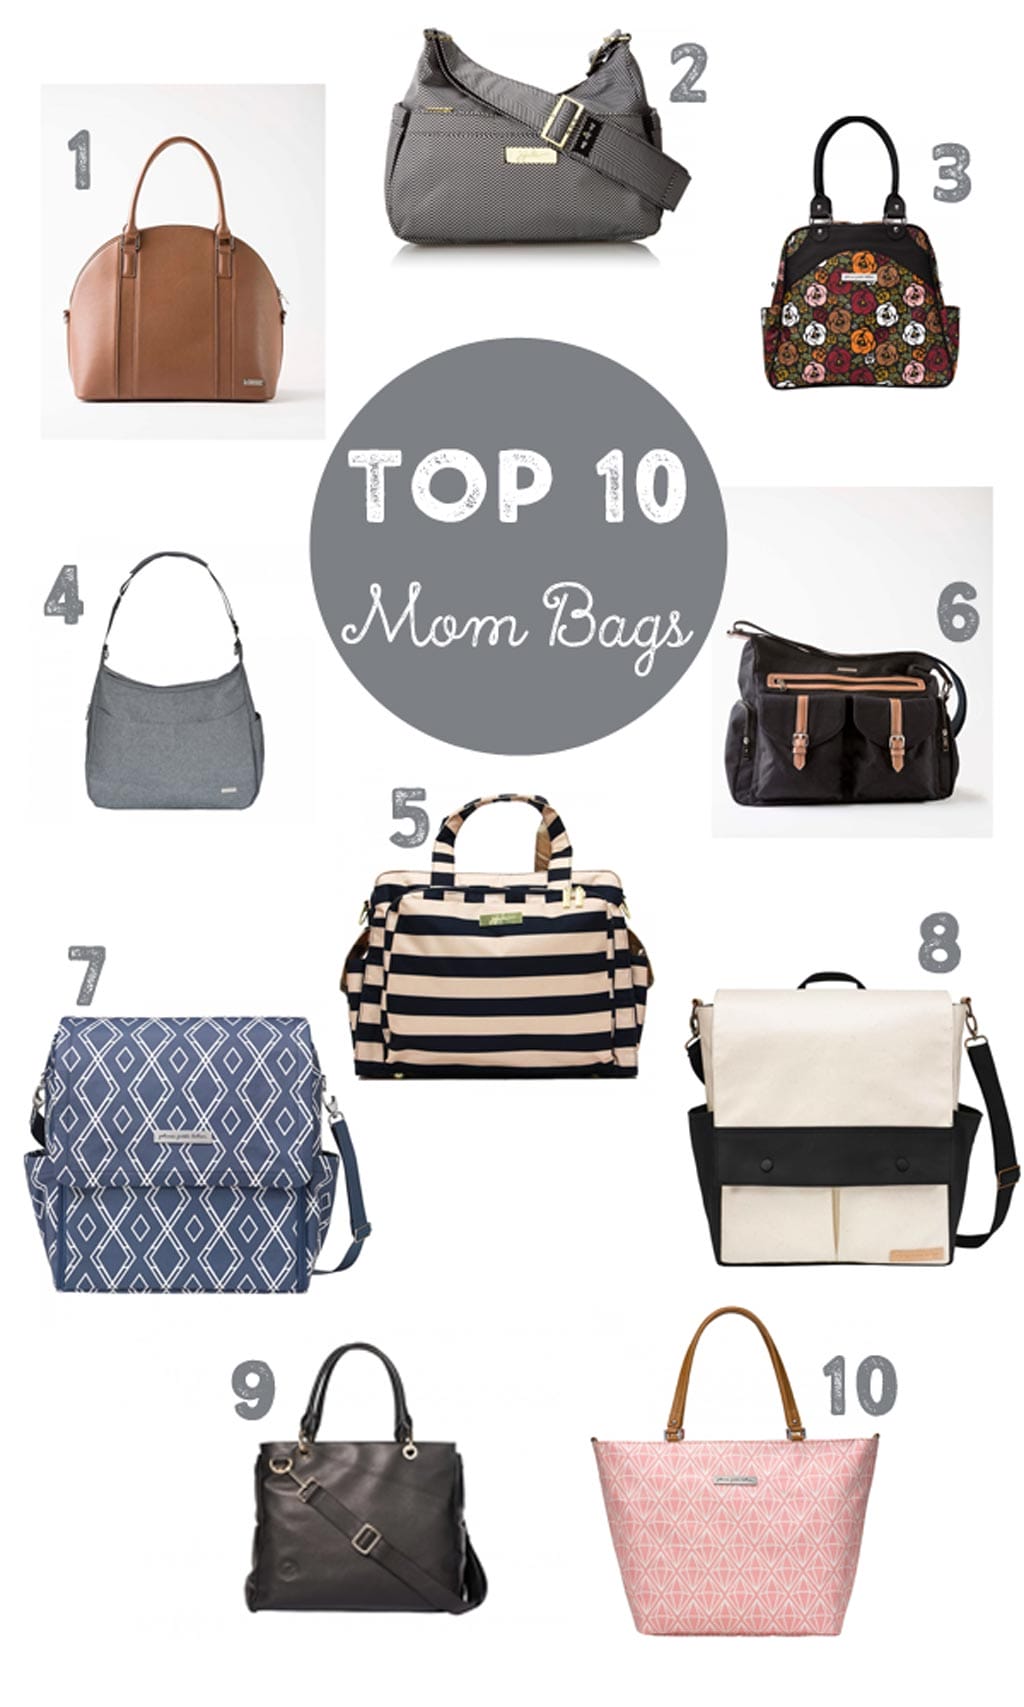 Top 10 Mom Bags - Diaper Bags for all stages of motherhood - even a bag for Dad!